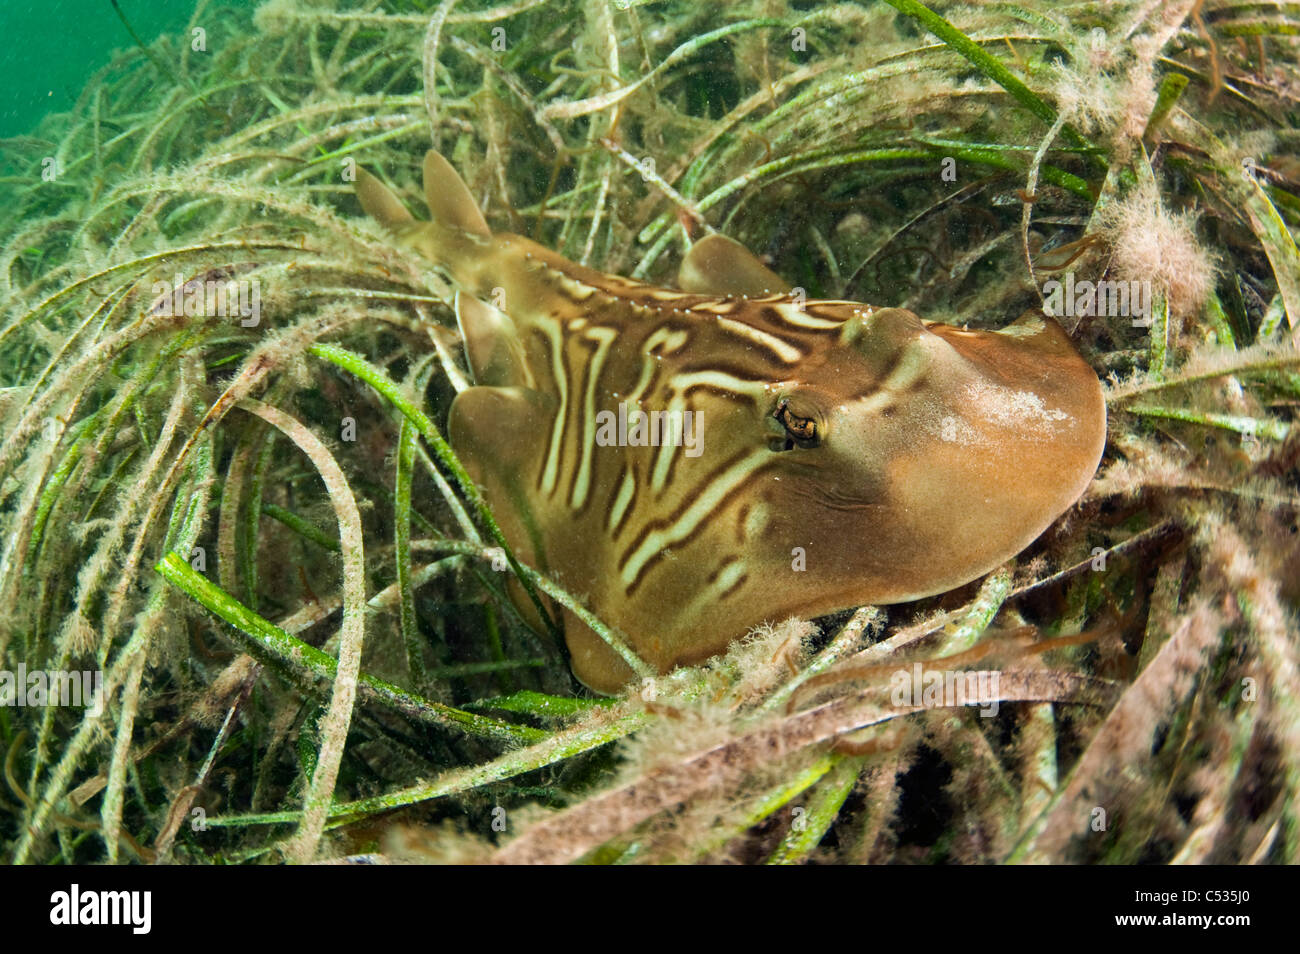 A Southern Fiddler Ray (Trygonorrhina fasciata) rests on a bed of sea grass in Edithburgh, South Australia. Stock Photo